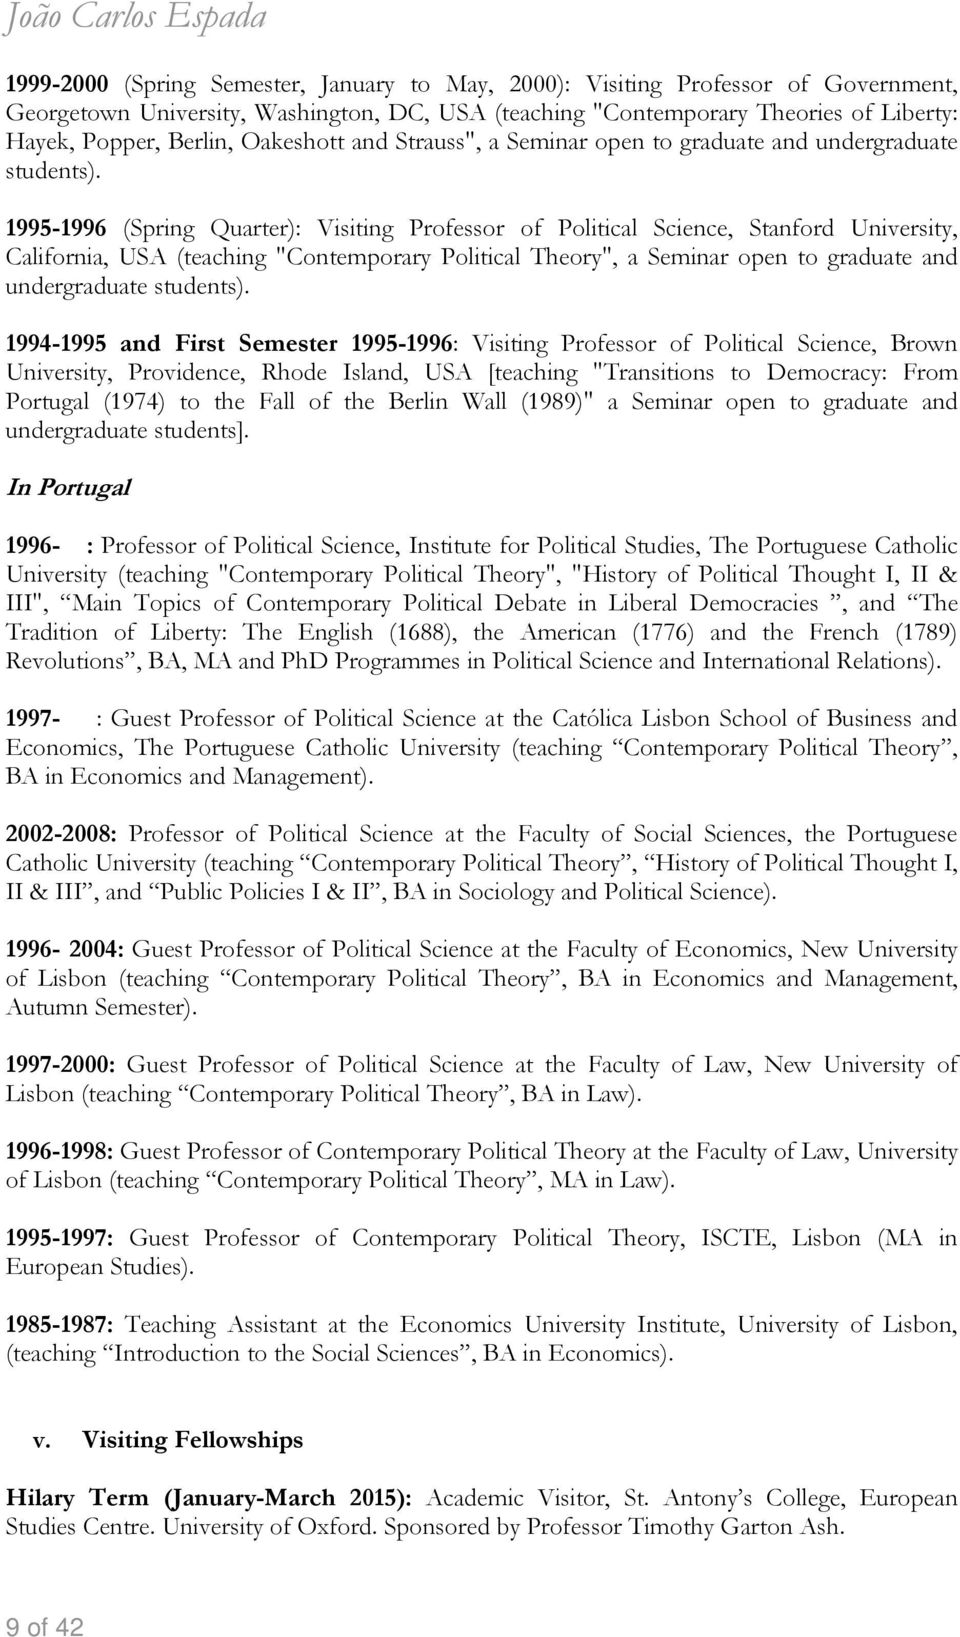 1995-1996 (Spring Quarter): Visiting Professor of Political Science, Stanford University, California, USA (teaching "Contemporary Political Theory", a Seminar open to graduate and undergraduate